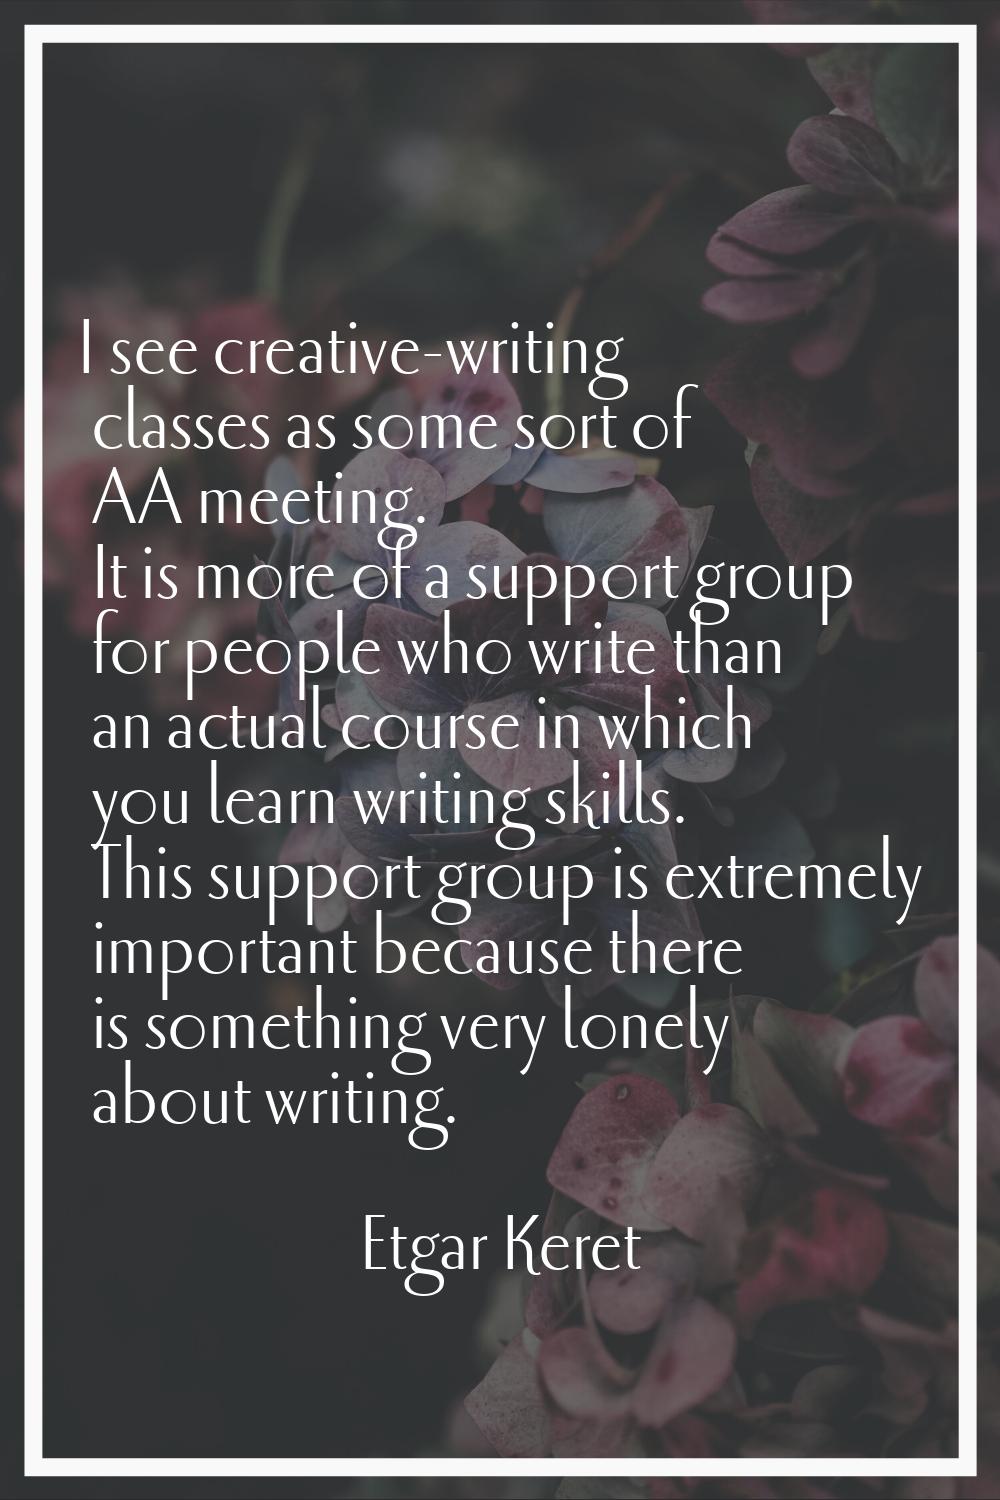 I see creative-writing classes as some sort of AA meeting. It is more of a support group for people